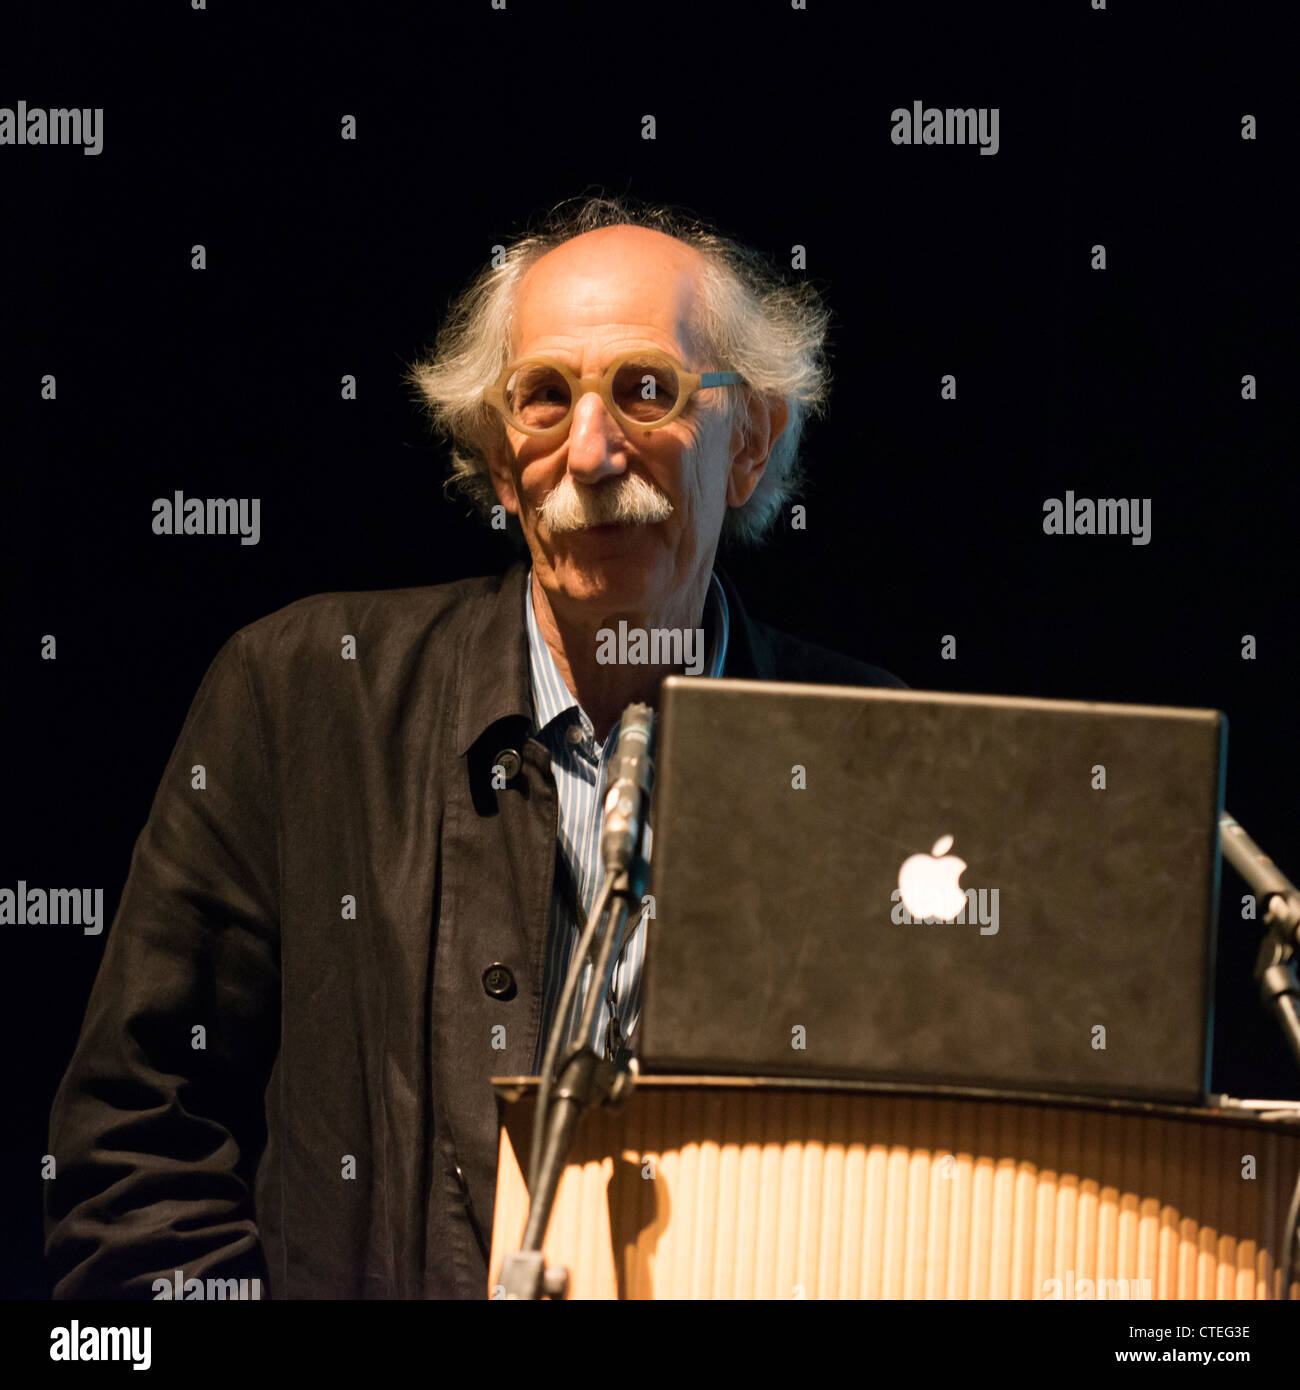 COLIN JACOBSON at The Eye, documentary photography festival, Aberystwyth Arts Centre, June 2012 Wales UK Stock Photo